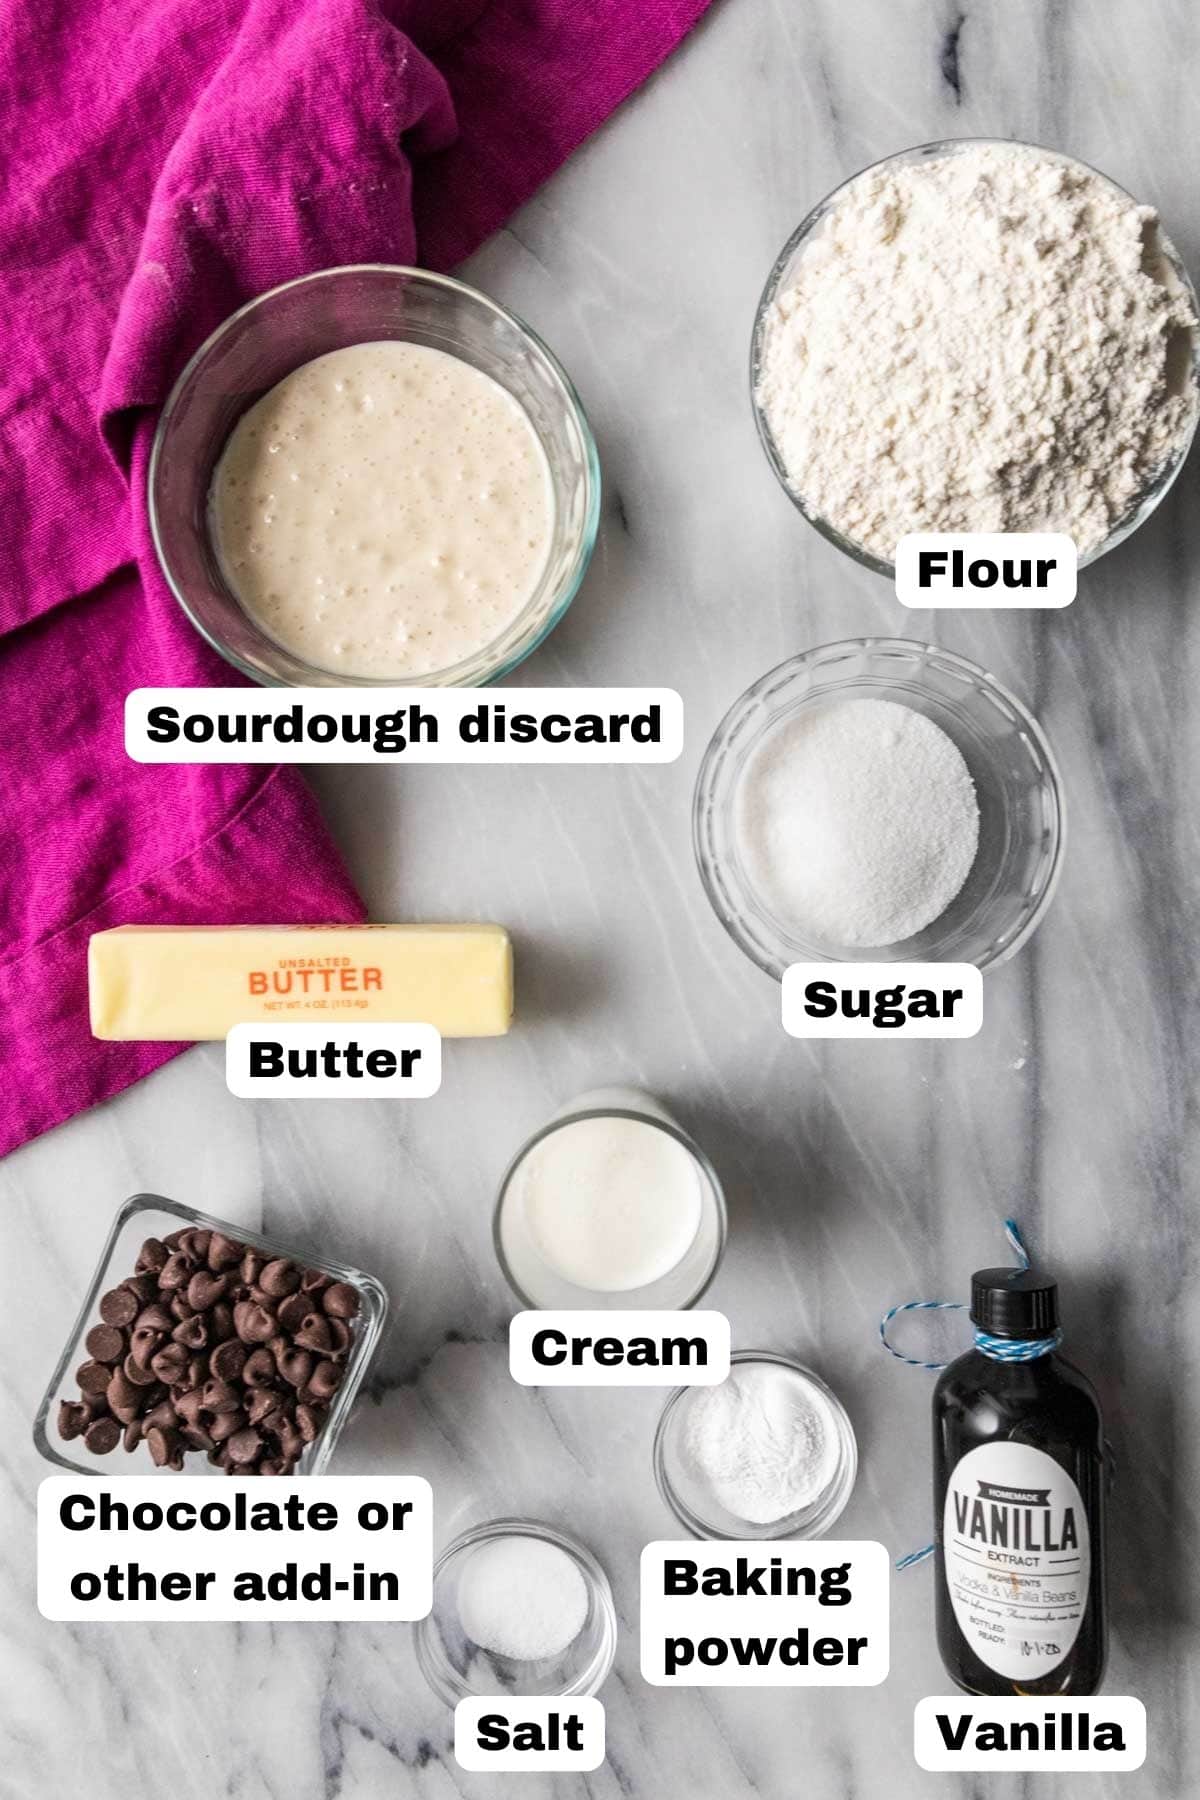 Overhead view of labelled ingredients including sourdough discard, chocolate chips, flour, and more.